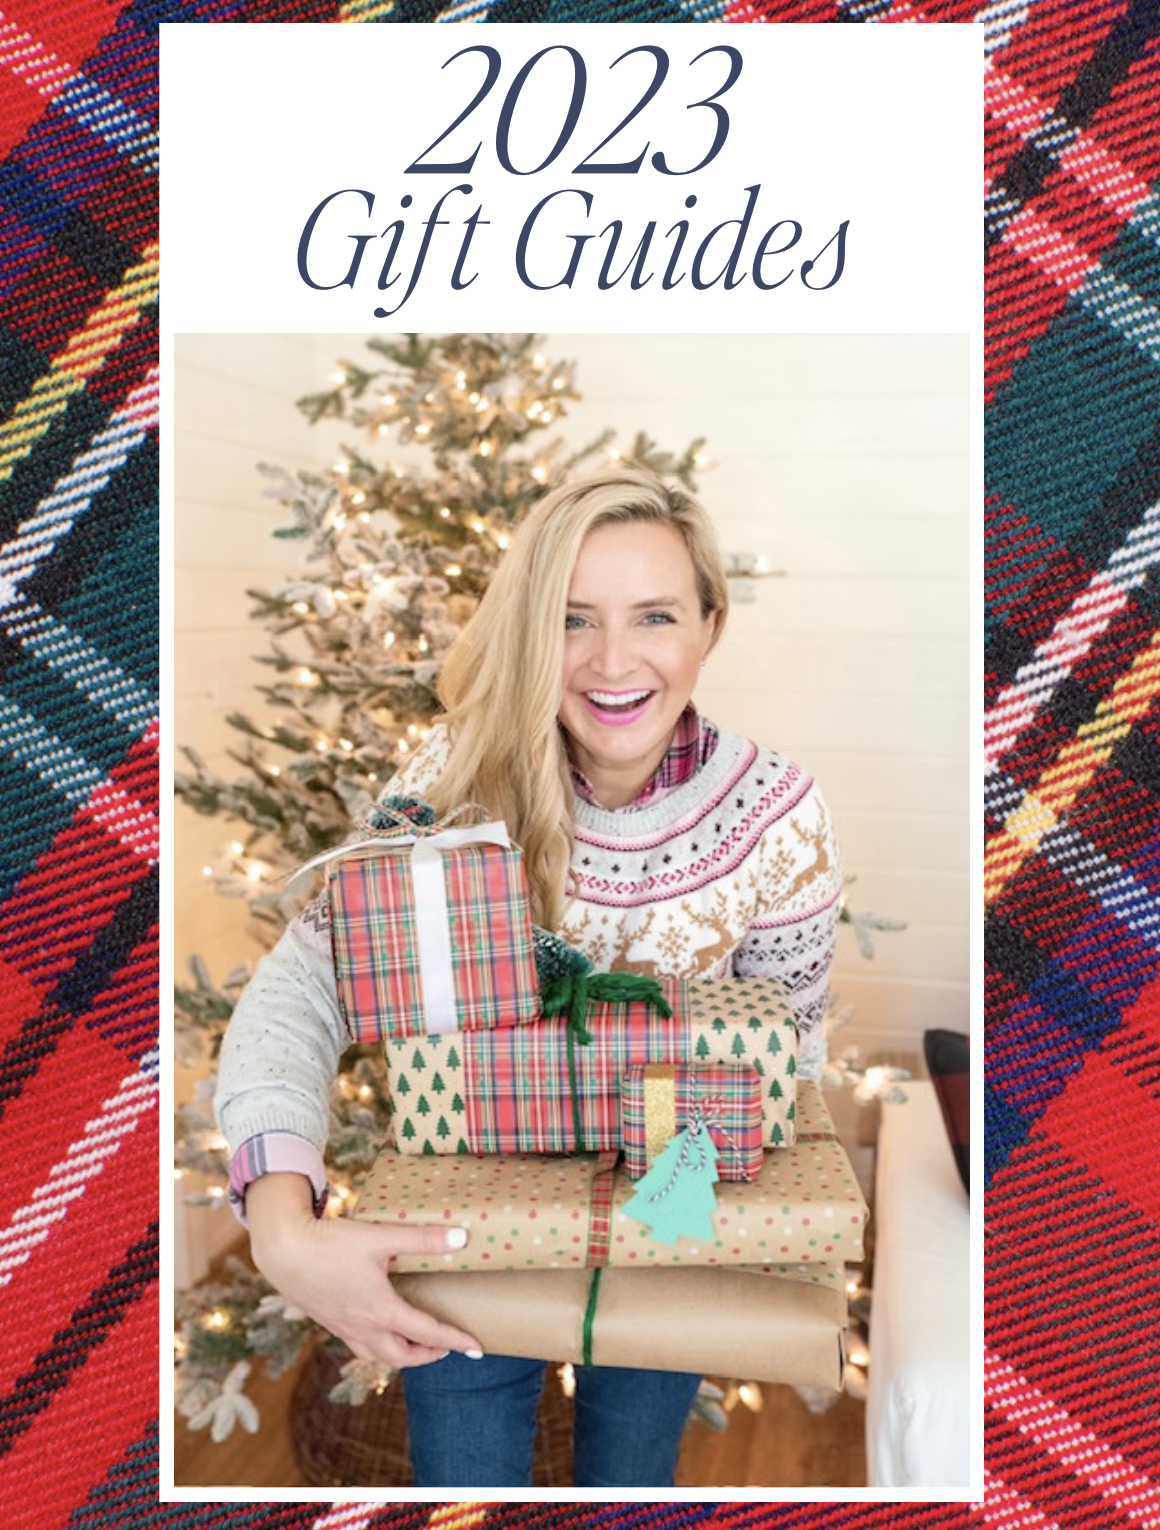 2023 Gift Guides